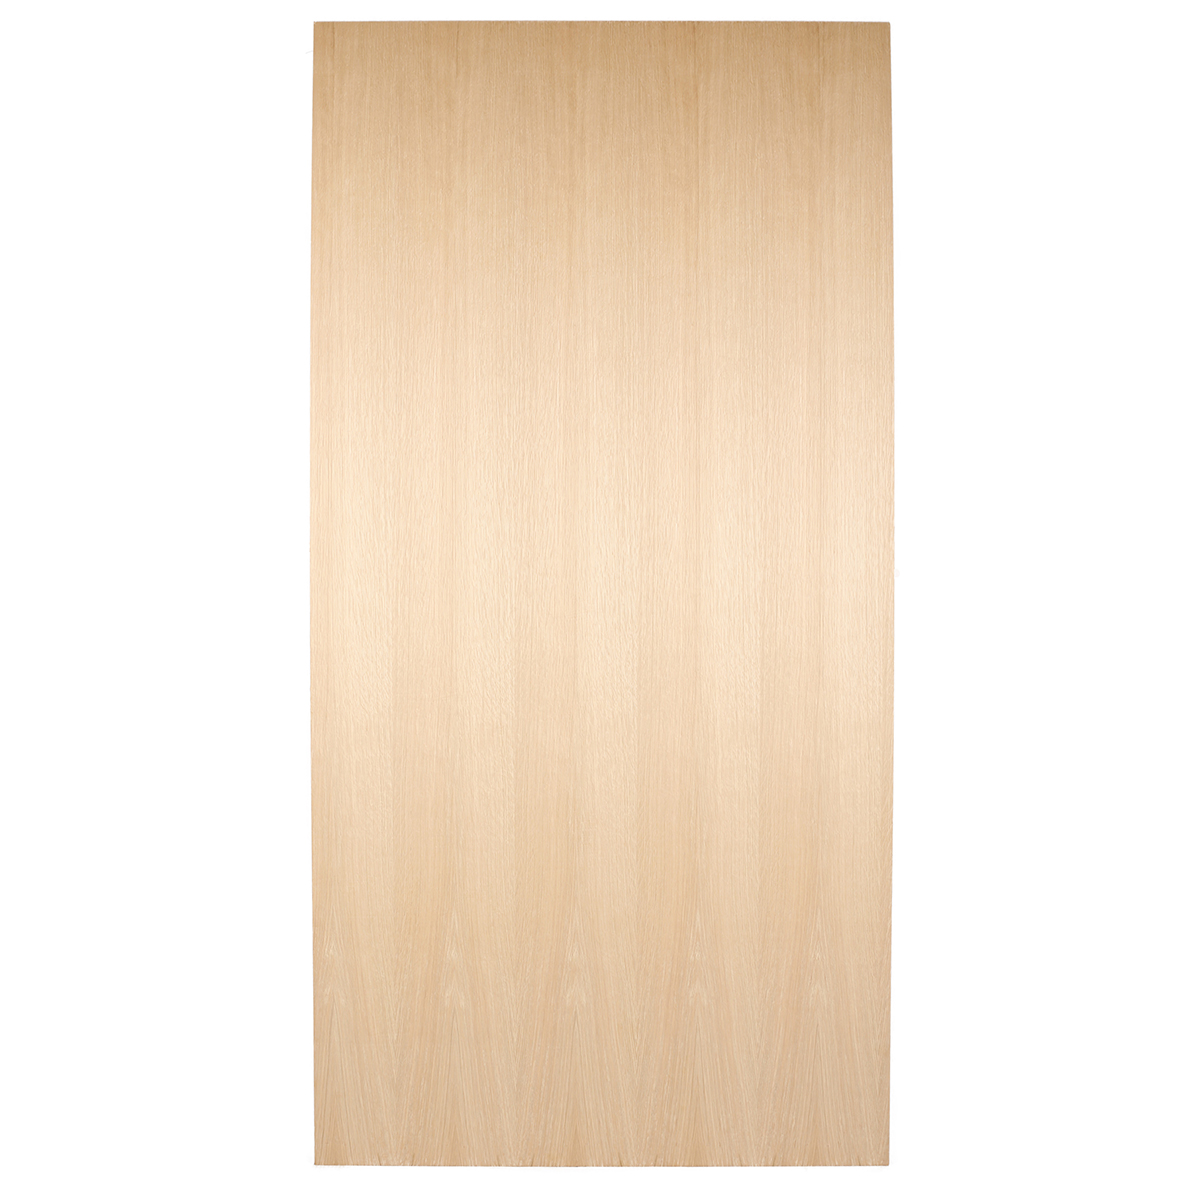 1 4 Quarter Sawn White Oak 4 x8 Plywood G1S Made in USA